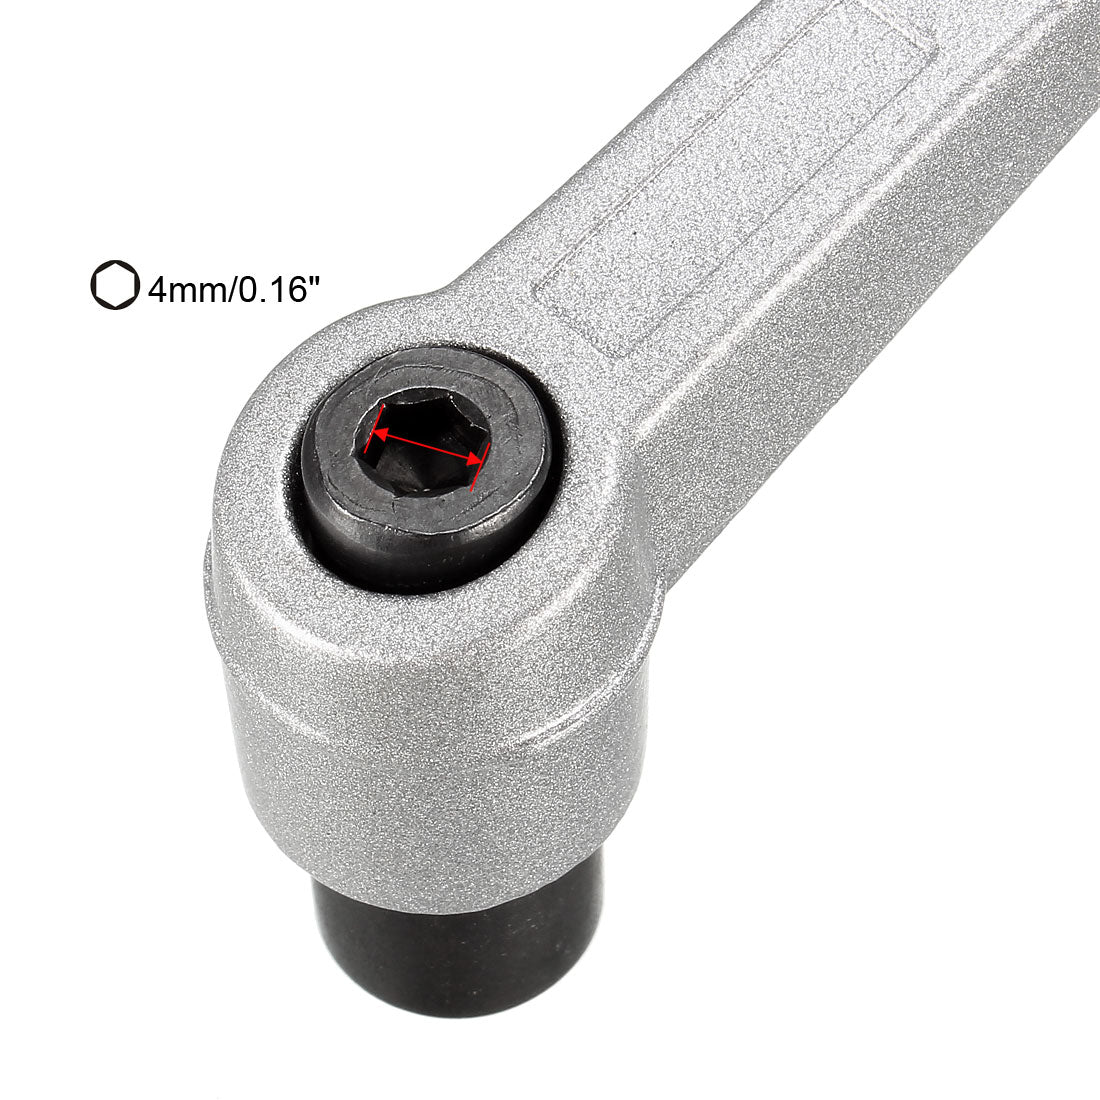 uxcell Uxcell M8 Handle Adjustable Clamping Lever Push Button Ratchet Female Threaded Stud